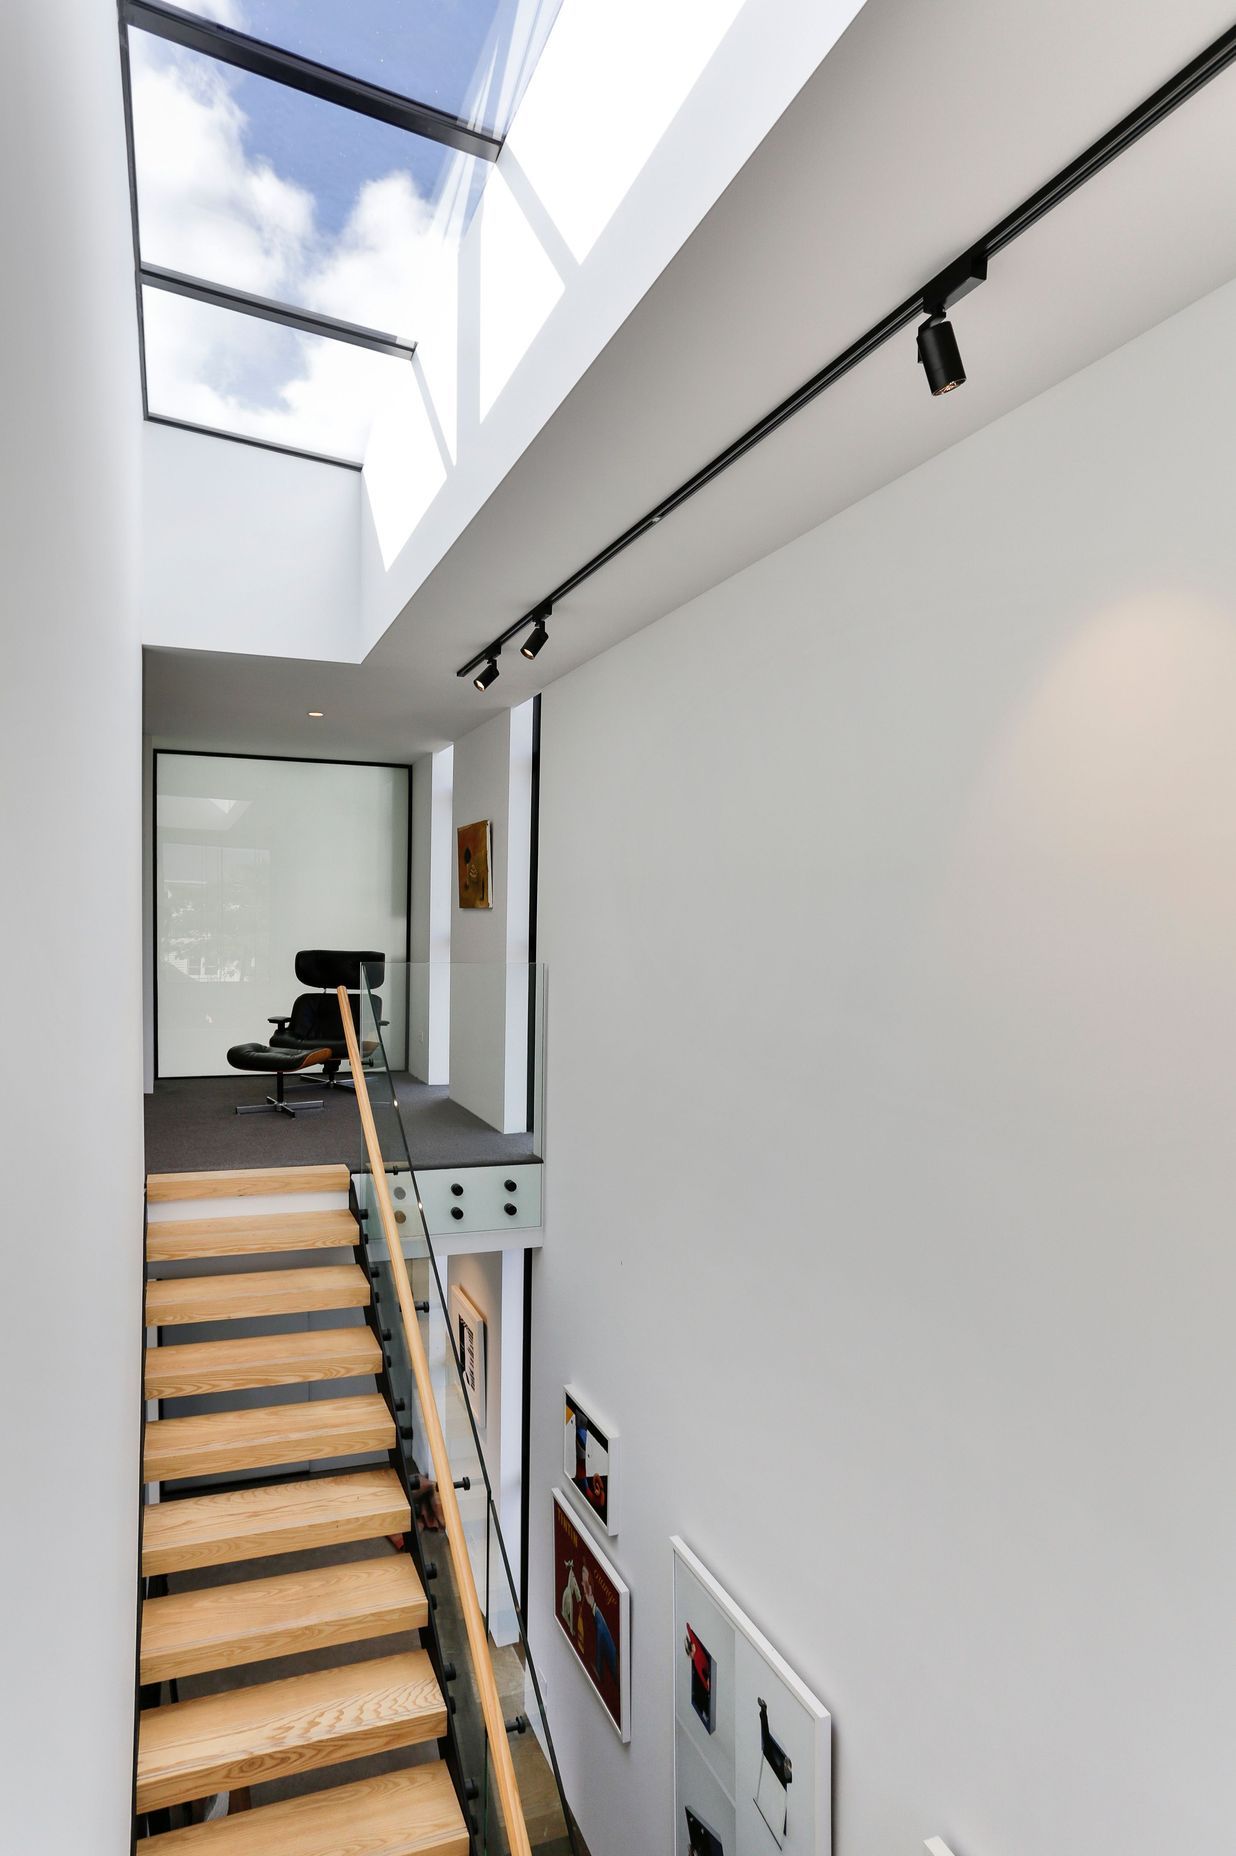 A long skylight pulls light into the entrance and staircase.